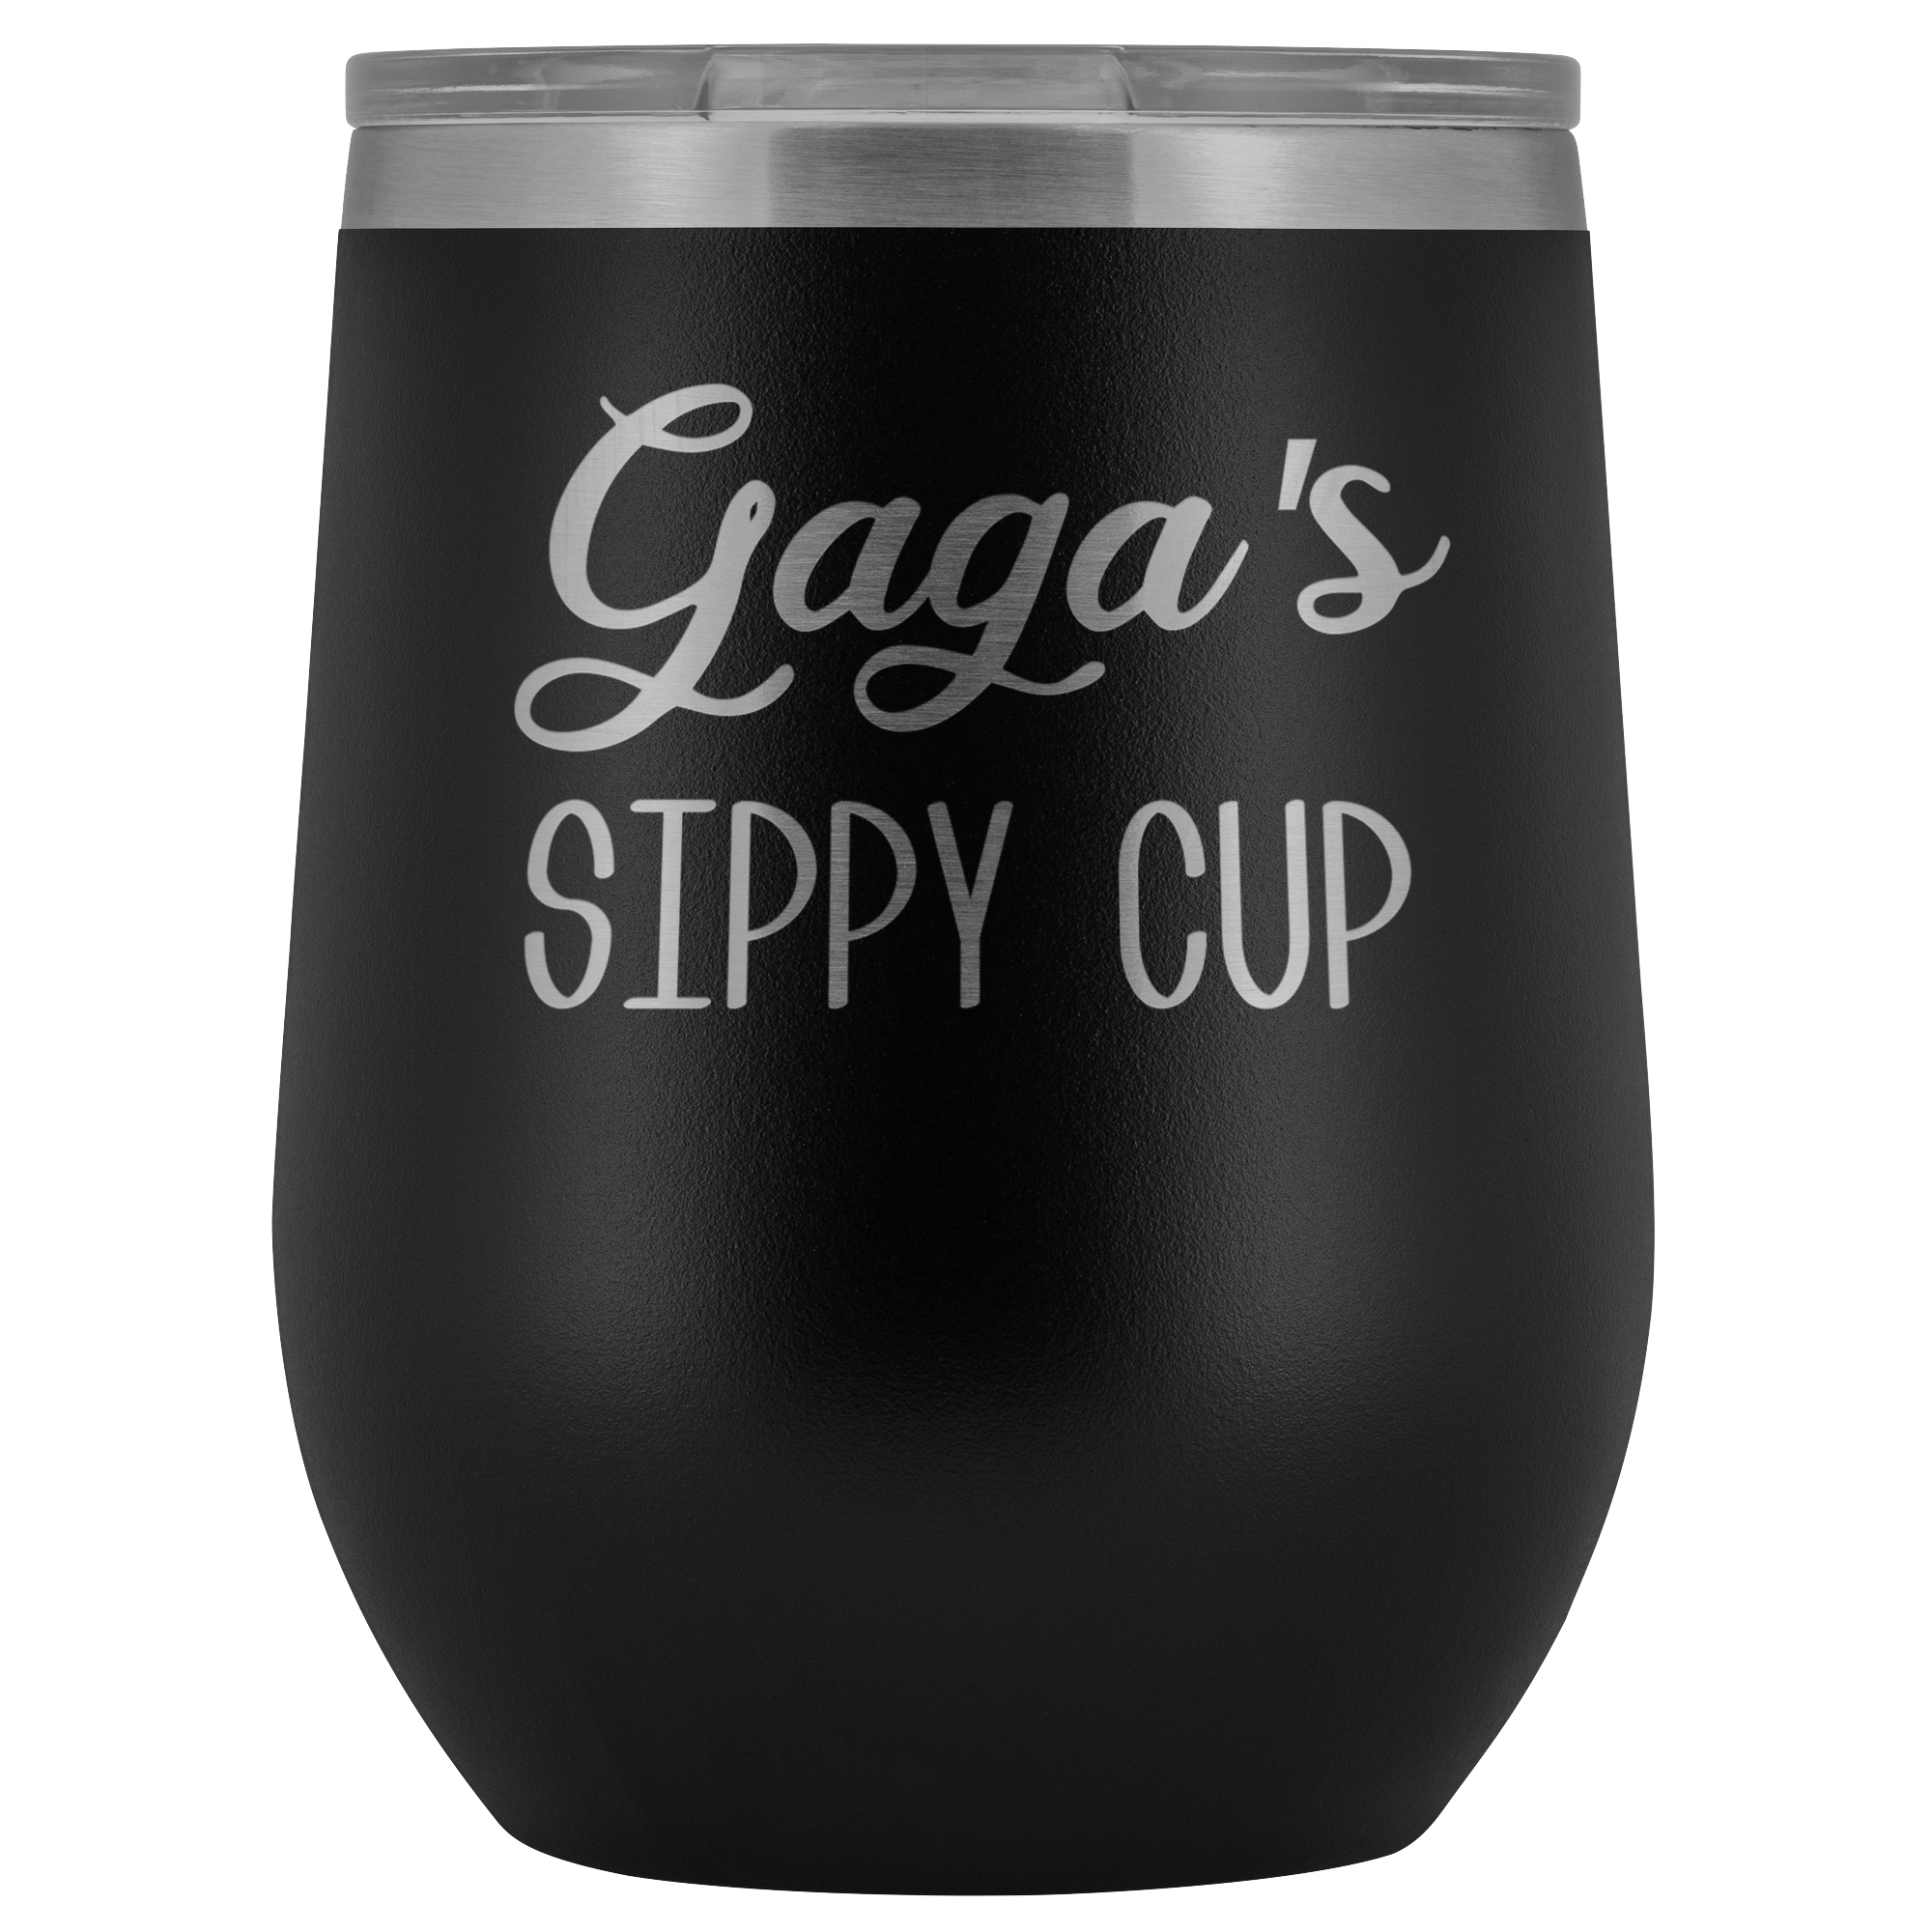 Gaga's Sippy Cup Gaga Wine Tumbler Gifts Funny Stemless Stainless Steel Insulated Wine Tumblers Hot Cold BPA Free 12oz Travel Cup